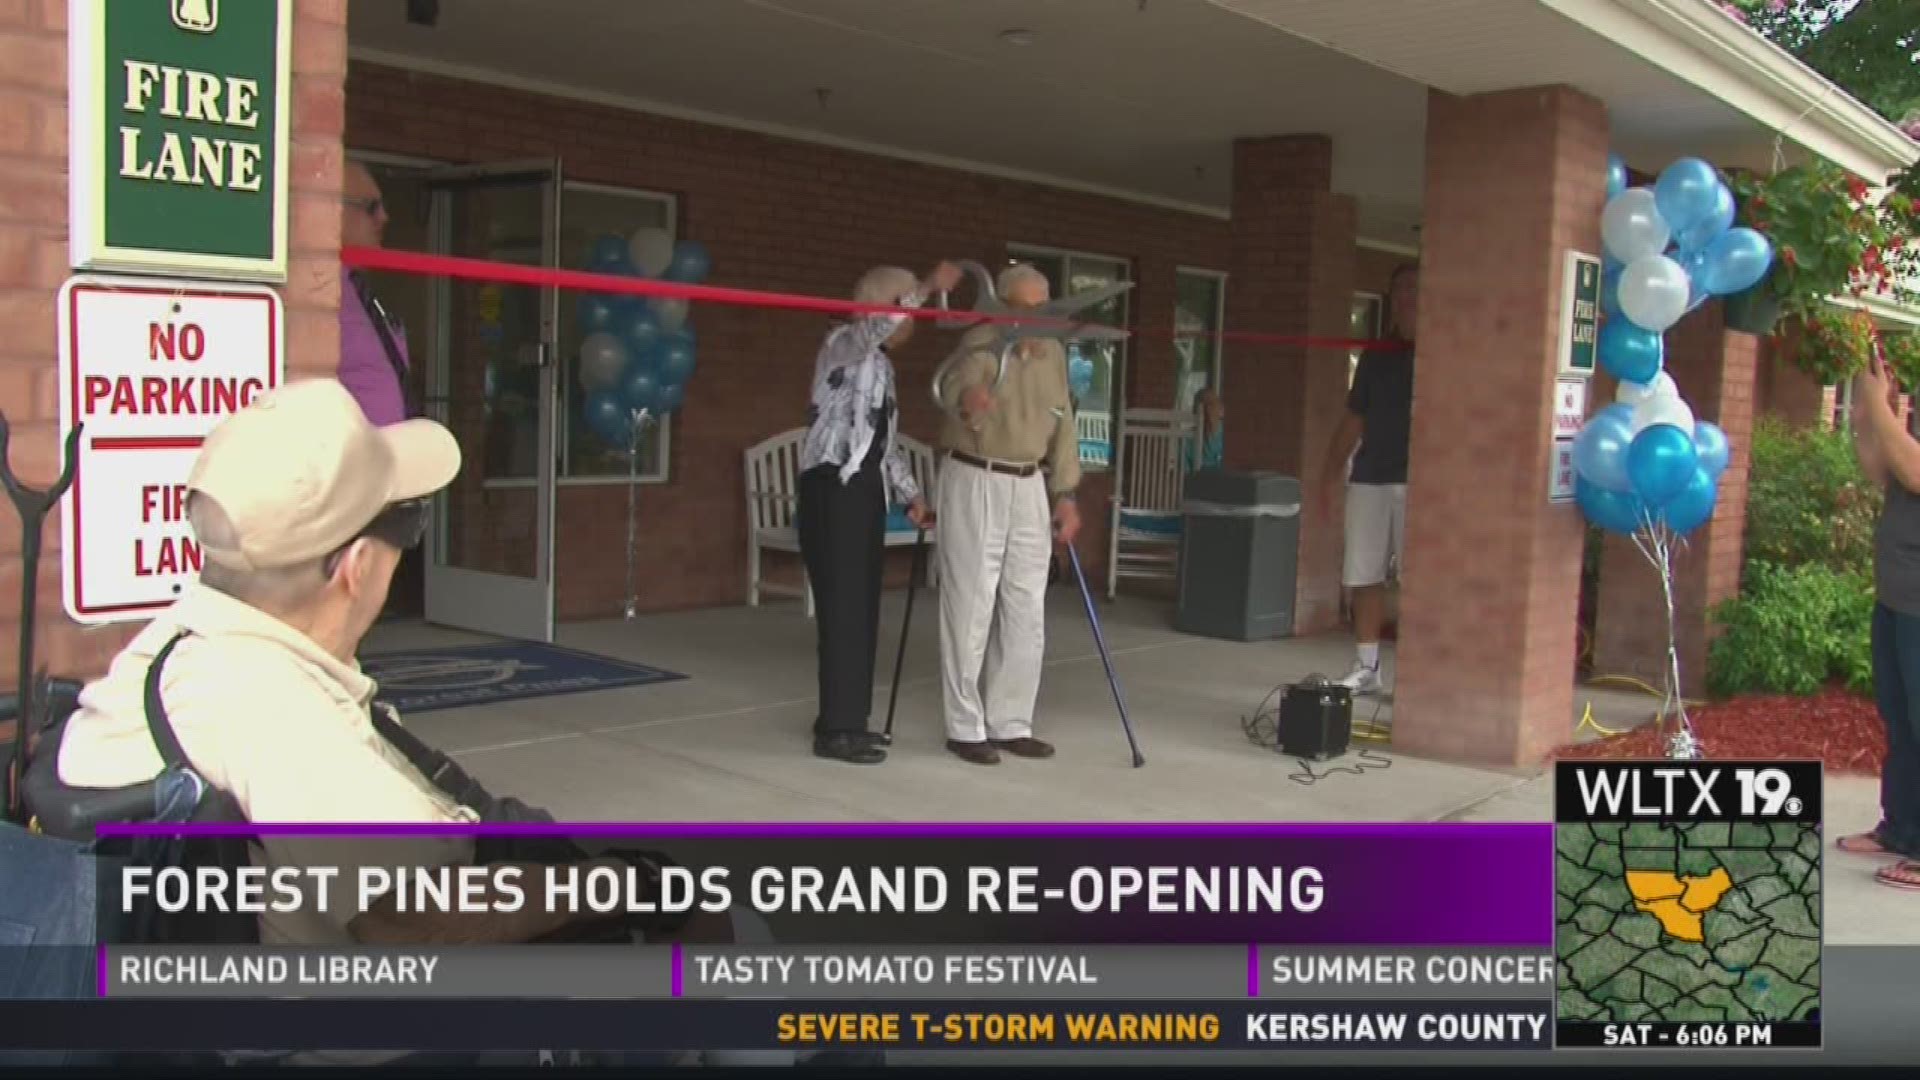 The Forest Pines Retirement Center is back open after a fire last year.